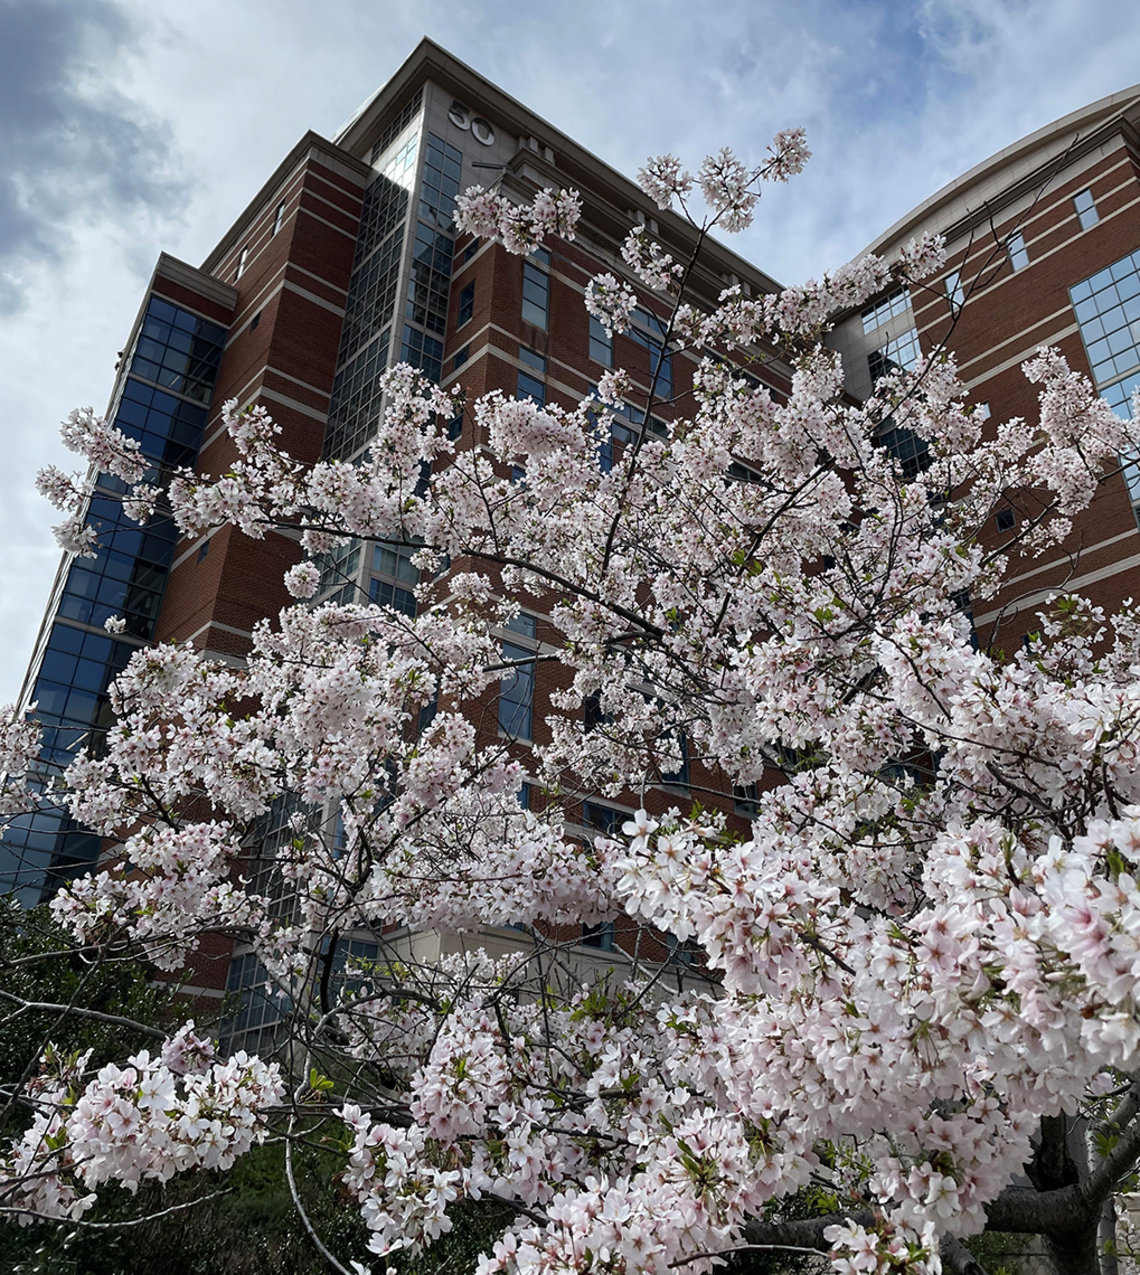 A blooming cherry tree in front of Bldg. 50